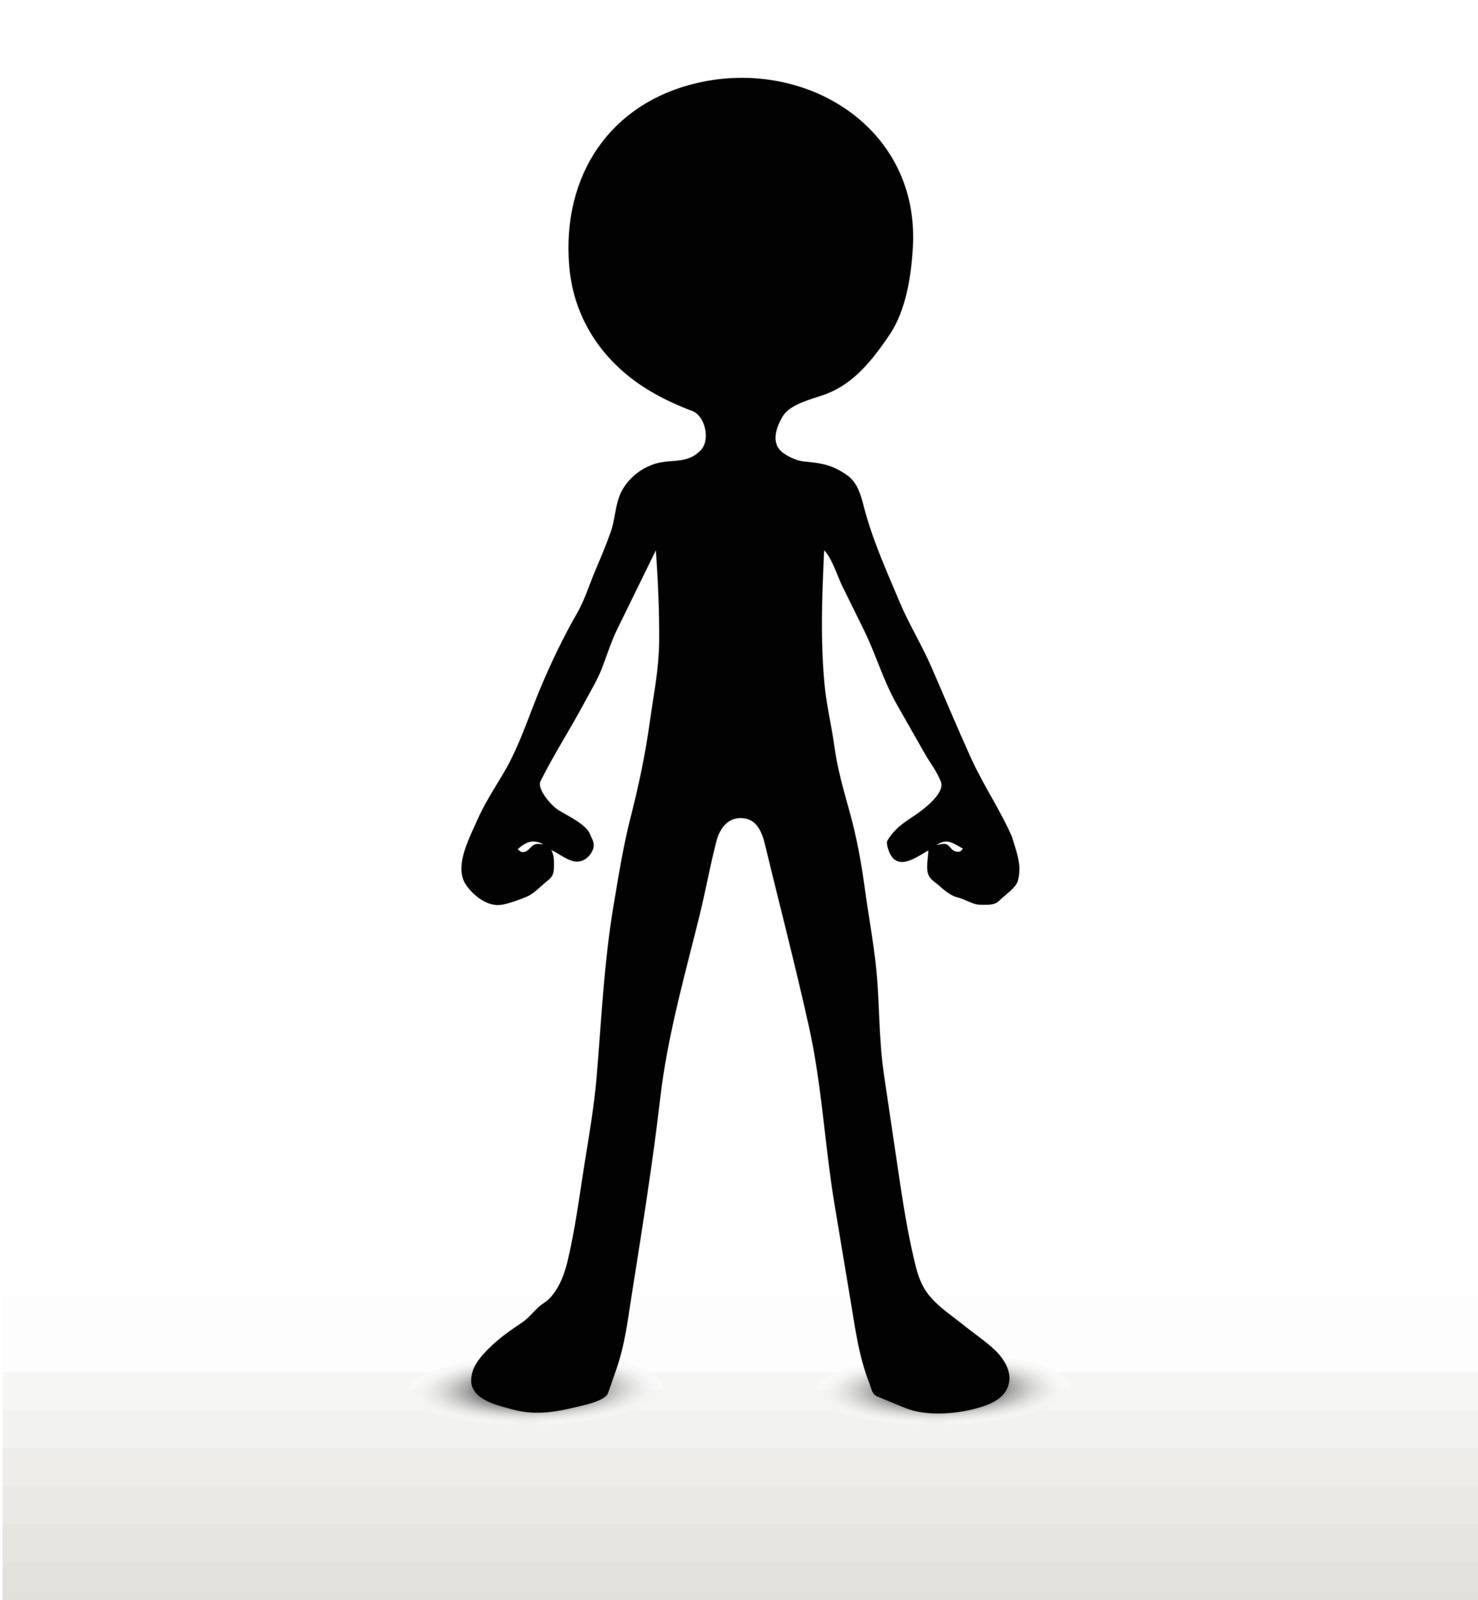 3d man silhouette, isolated on white background, standing
